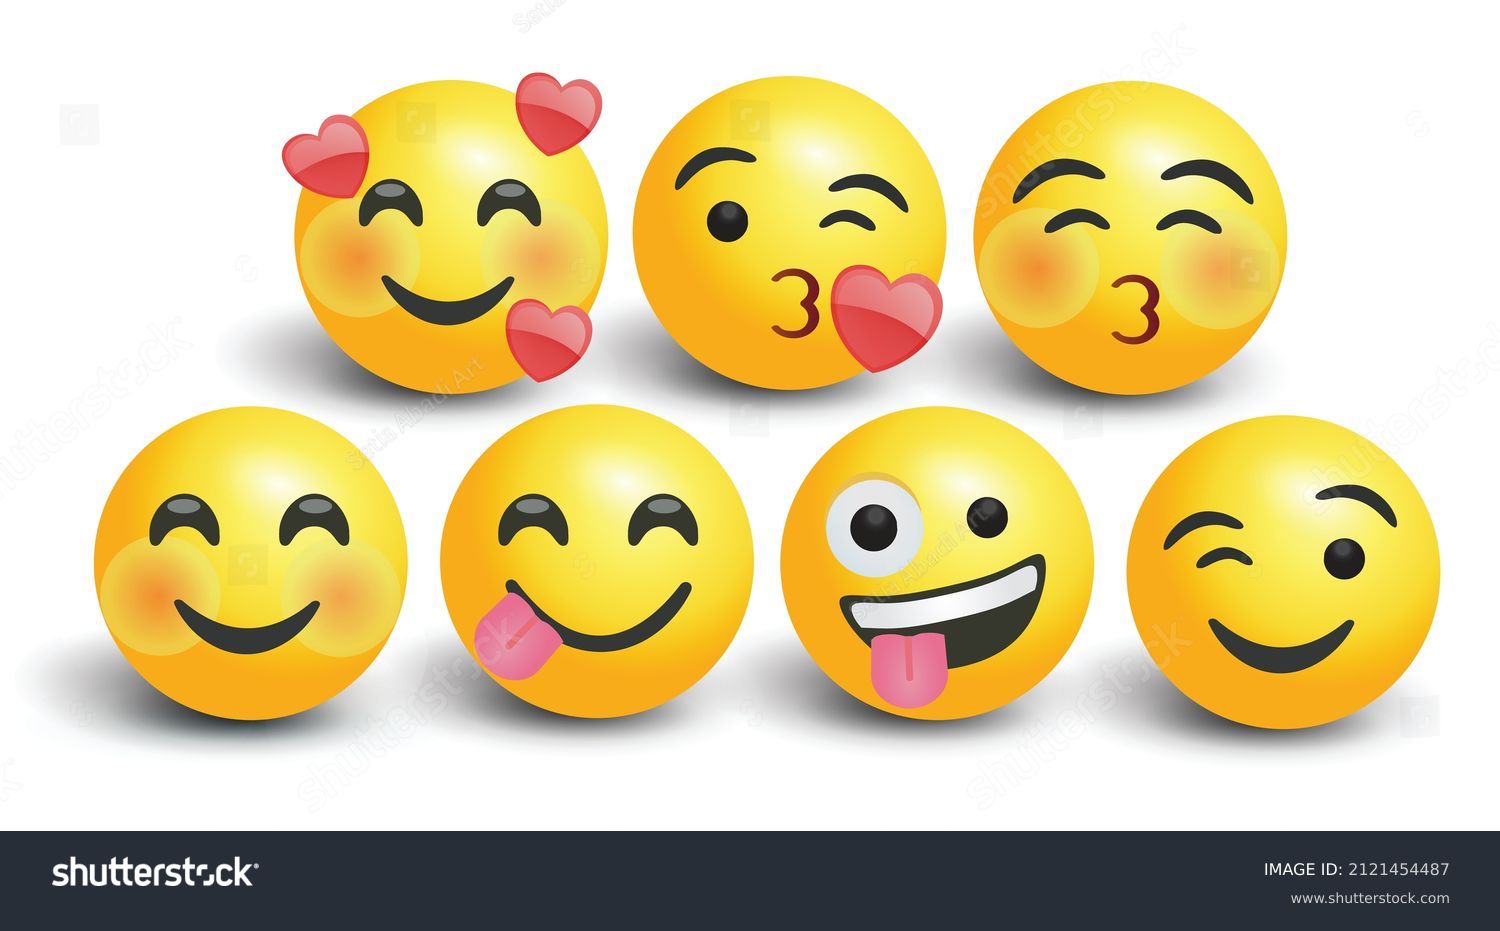 SVG of high quality icon 3d vector round yellow cartoon goofy emoticons kiss social media Whatsapp Valentine's Facebook smile chat comment reactions crazy template face love laughter emoji character message svg